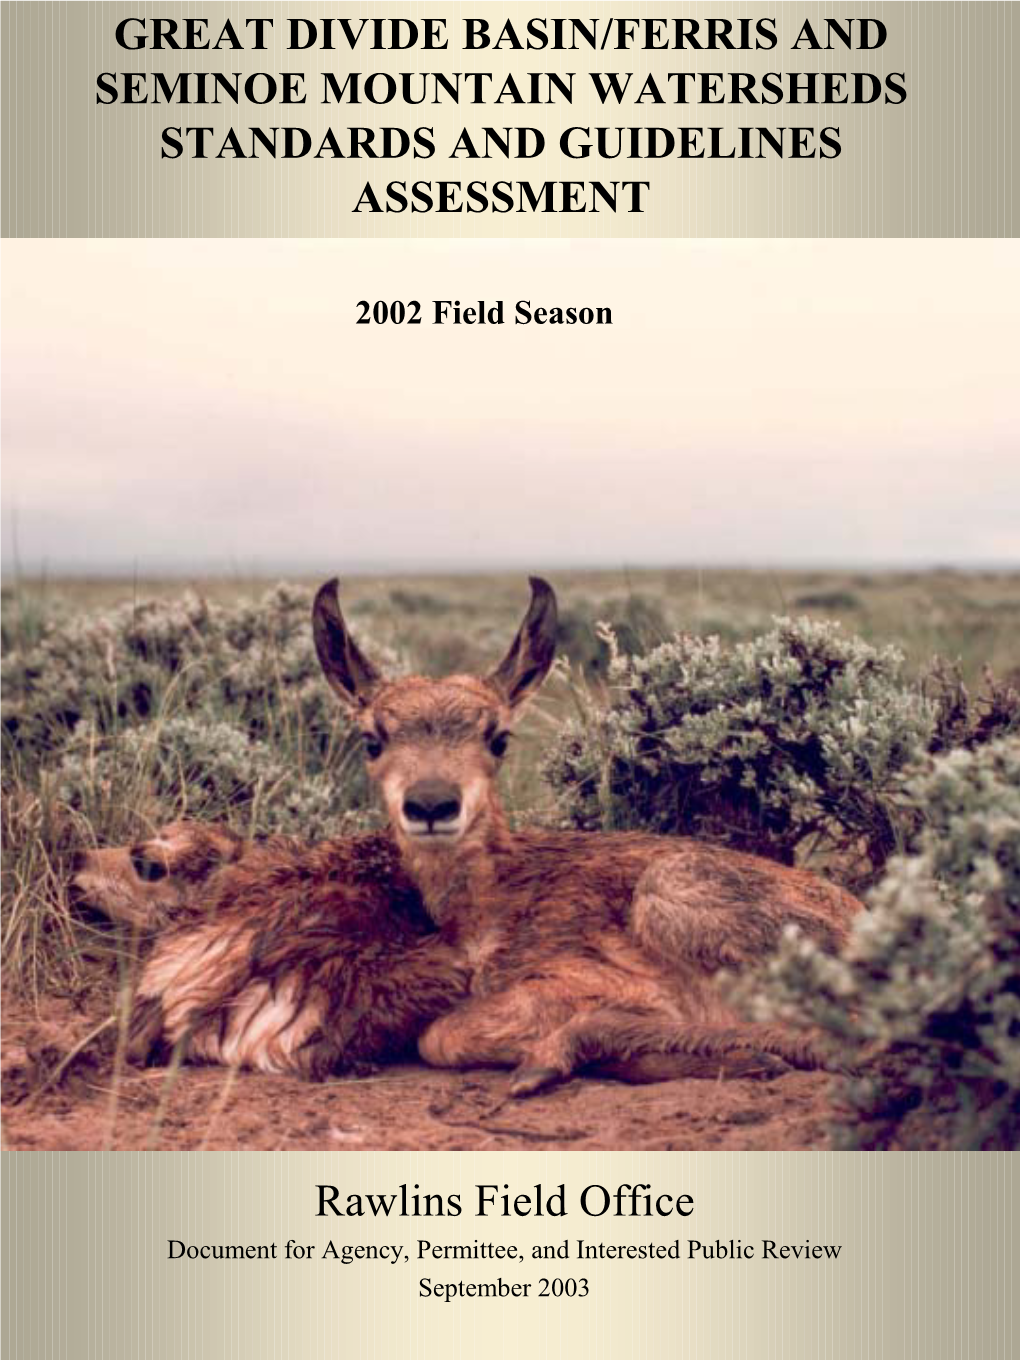 GREAT DIVIDE BASIN/FERRIS and SEMINOE MOUNTAIN WATERSHEDS STANDARDS and GUIDELINES ASSESSMENT Rawlins Field Office